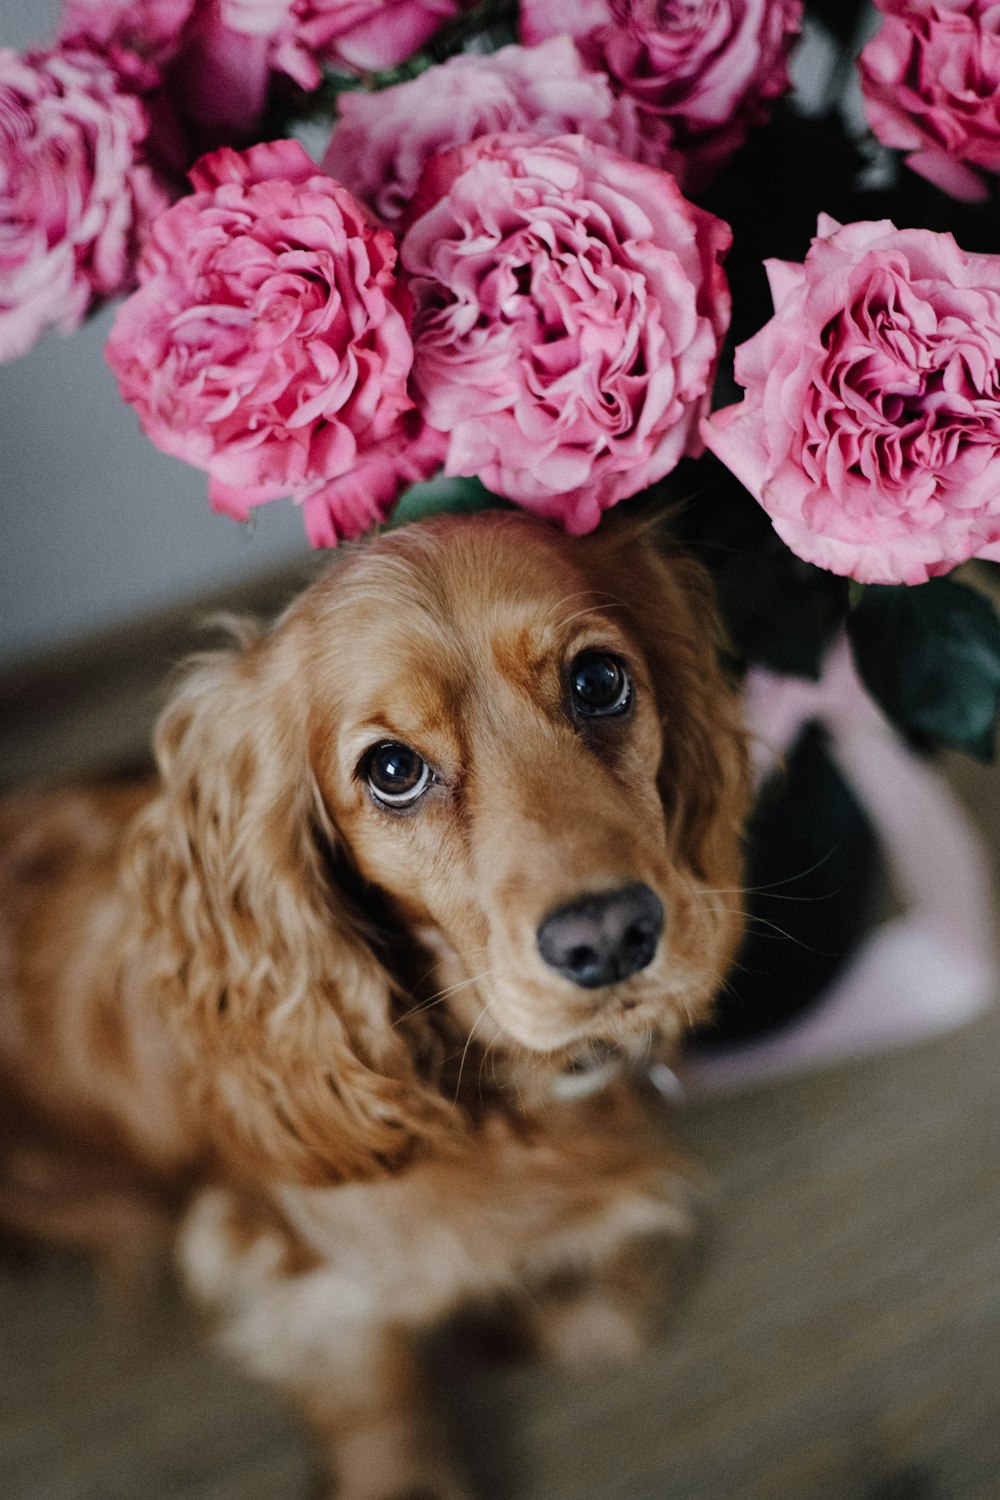 a brown dog sitting next to a bunch of pink flowers